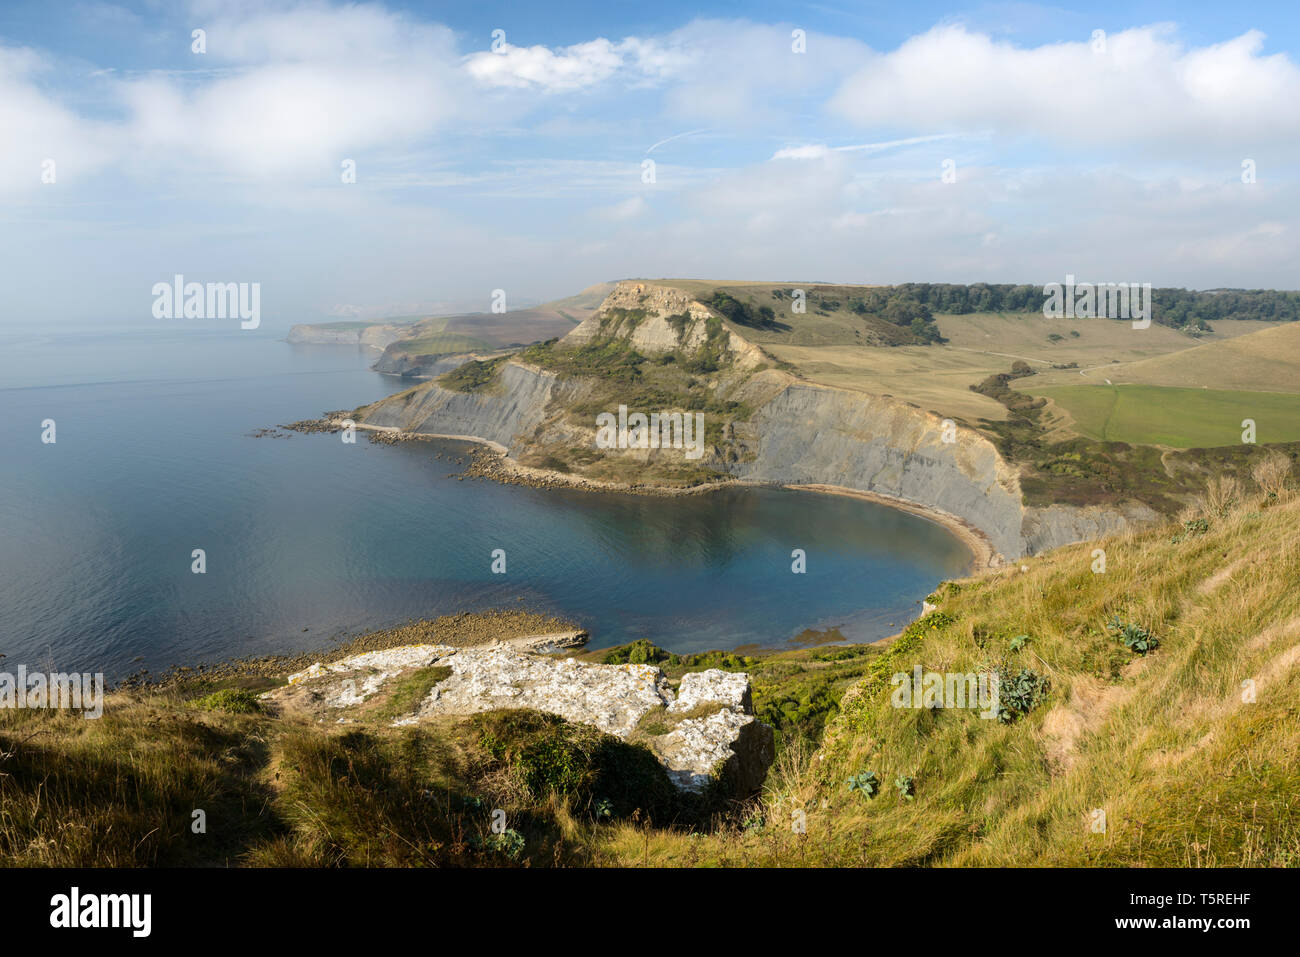 A westward view of the Dorset coastline, taken from Emmett's Hill on the Isle of Purbeck. Stock Photo